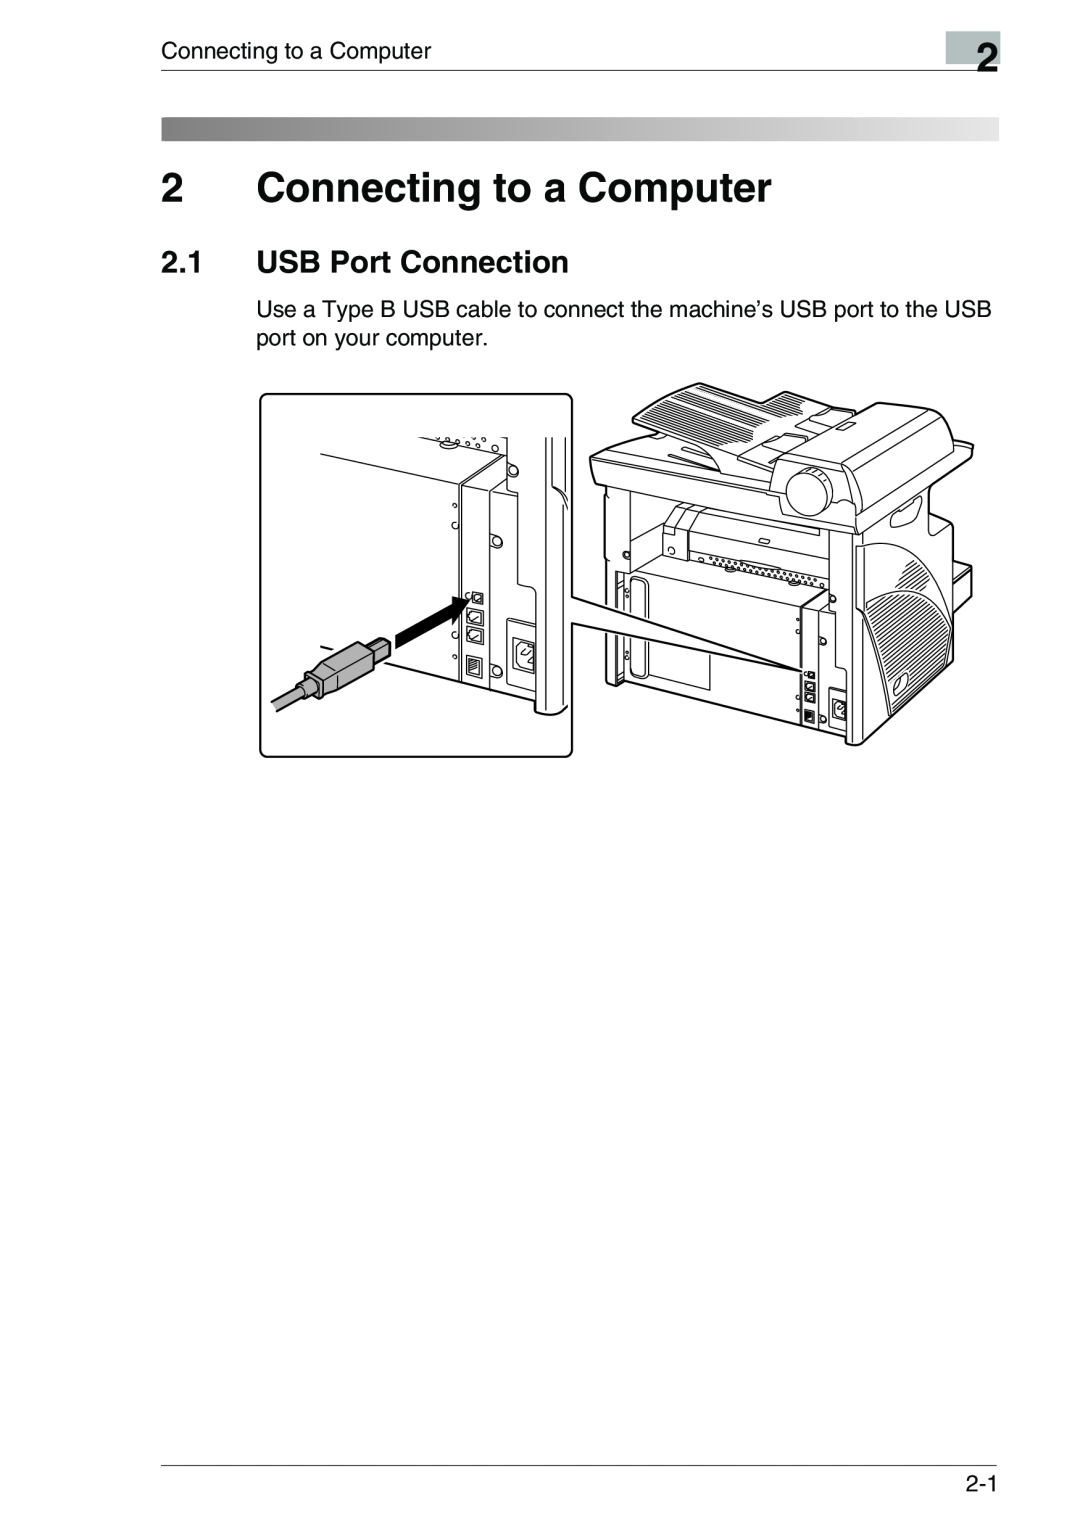 Konica Minolta FAX2900/FAX3900 manual Connecting to a Computer, USB Port Connection 